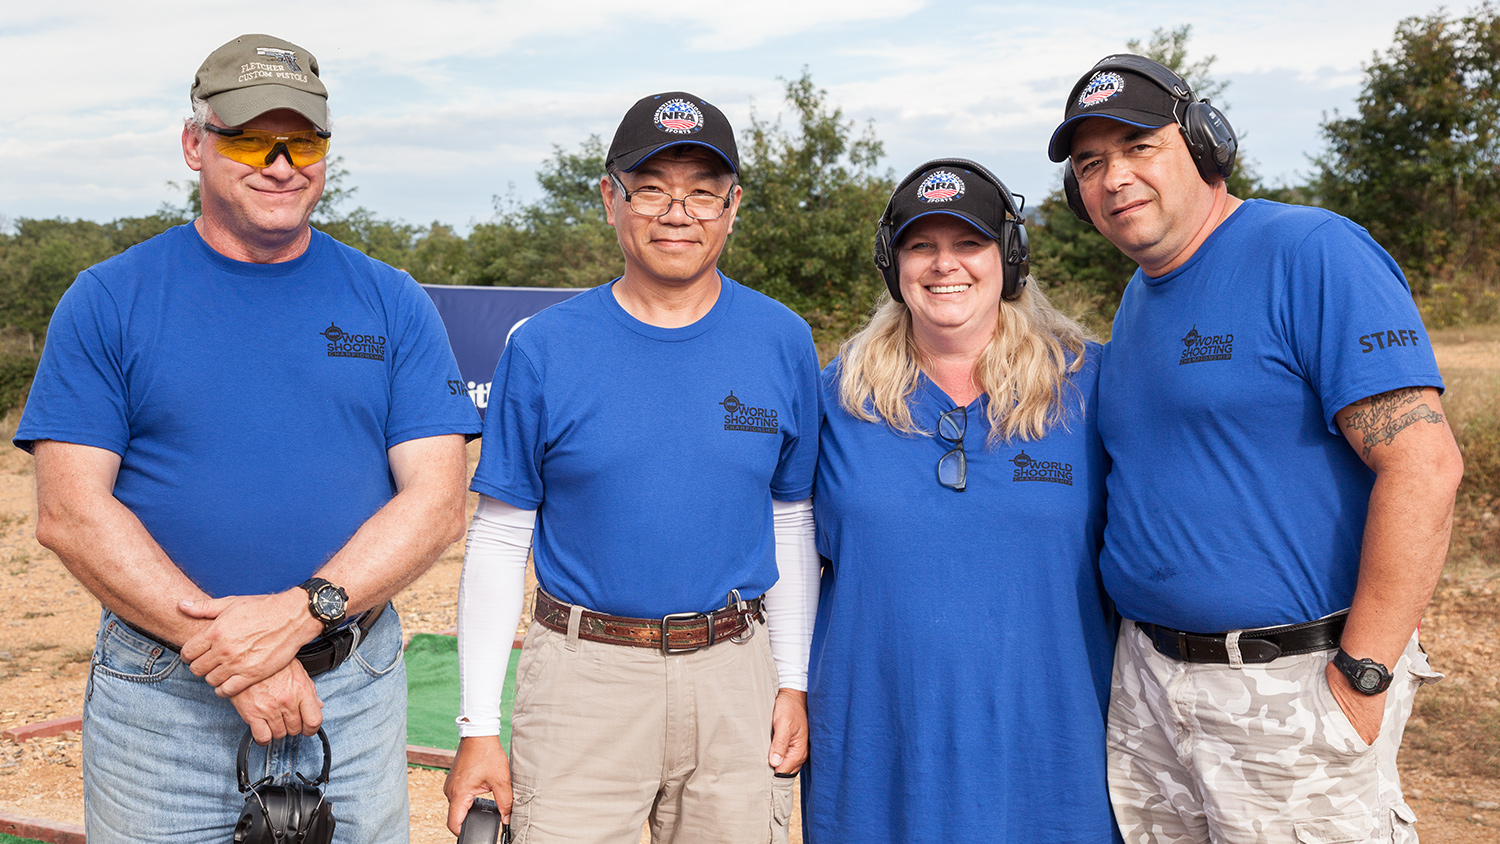 Stage 9, NRA Silhouette staff | NRA World Shooting Championship